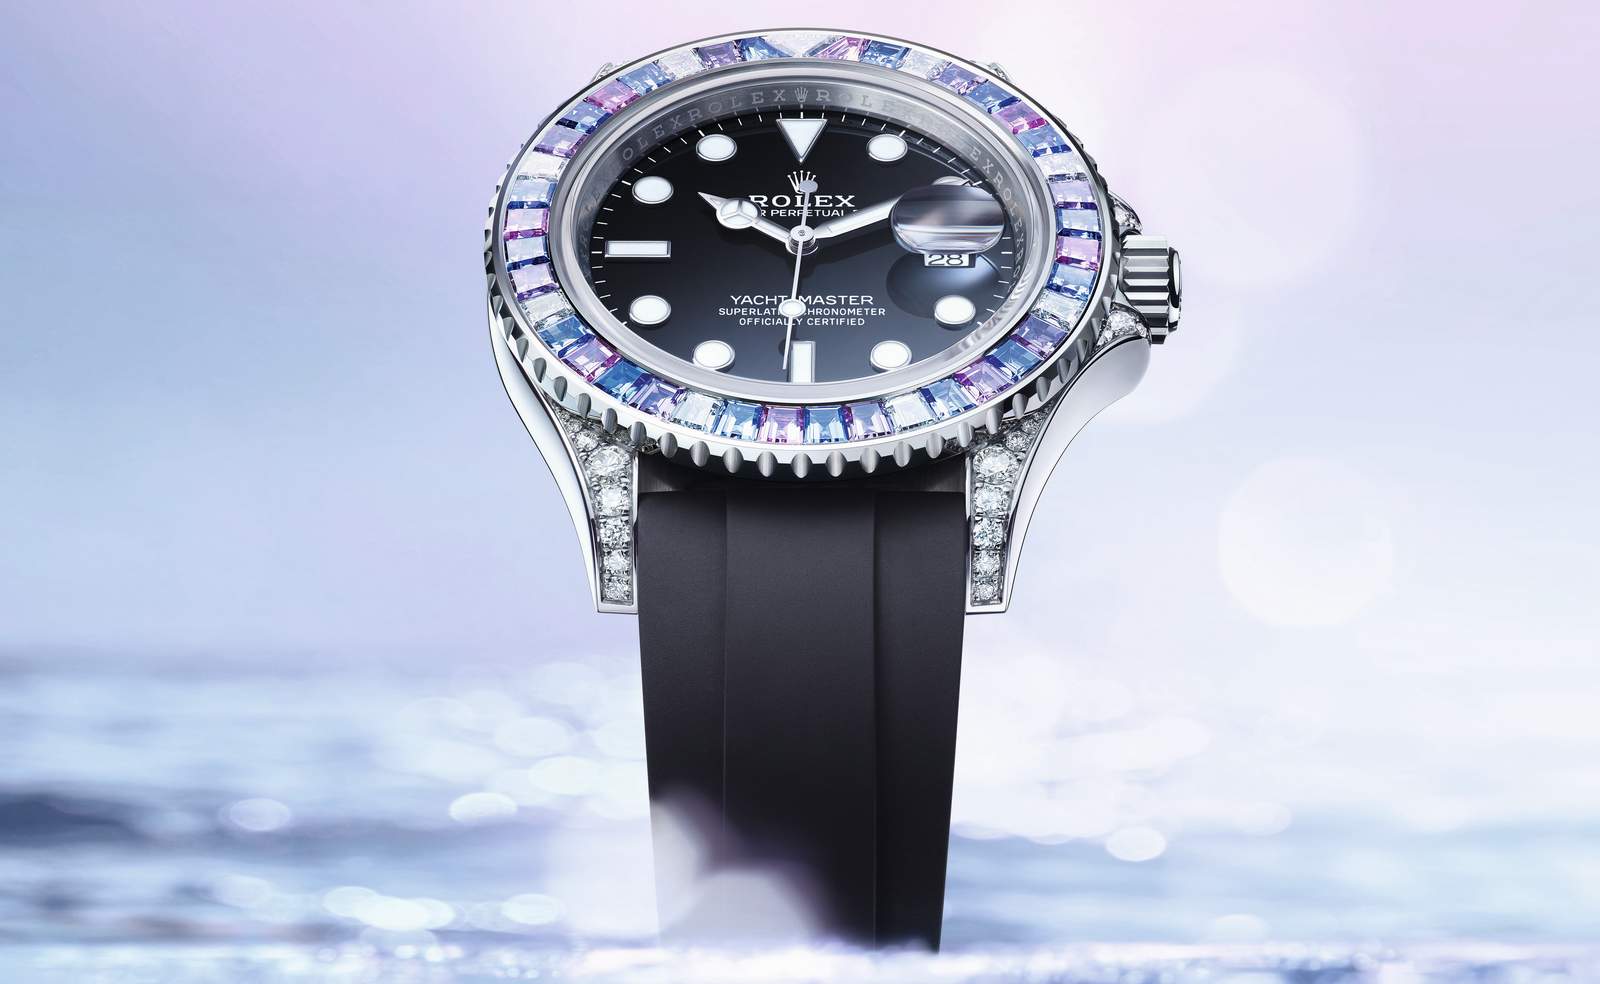 The new Rolex Oyster Perpetual Yacht-Master 40 gets an 18ct white gold for the first time and a gem-studded bezel inspired by the aurora borealis